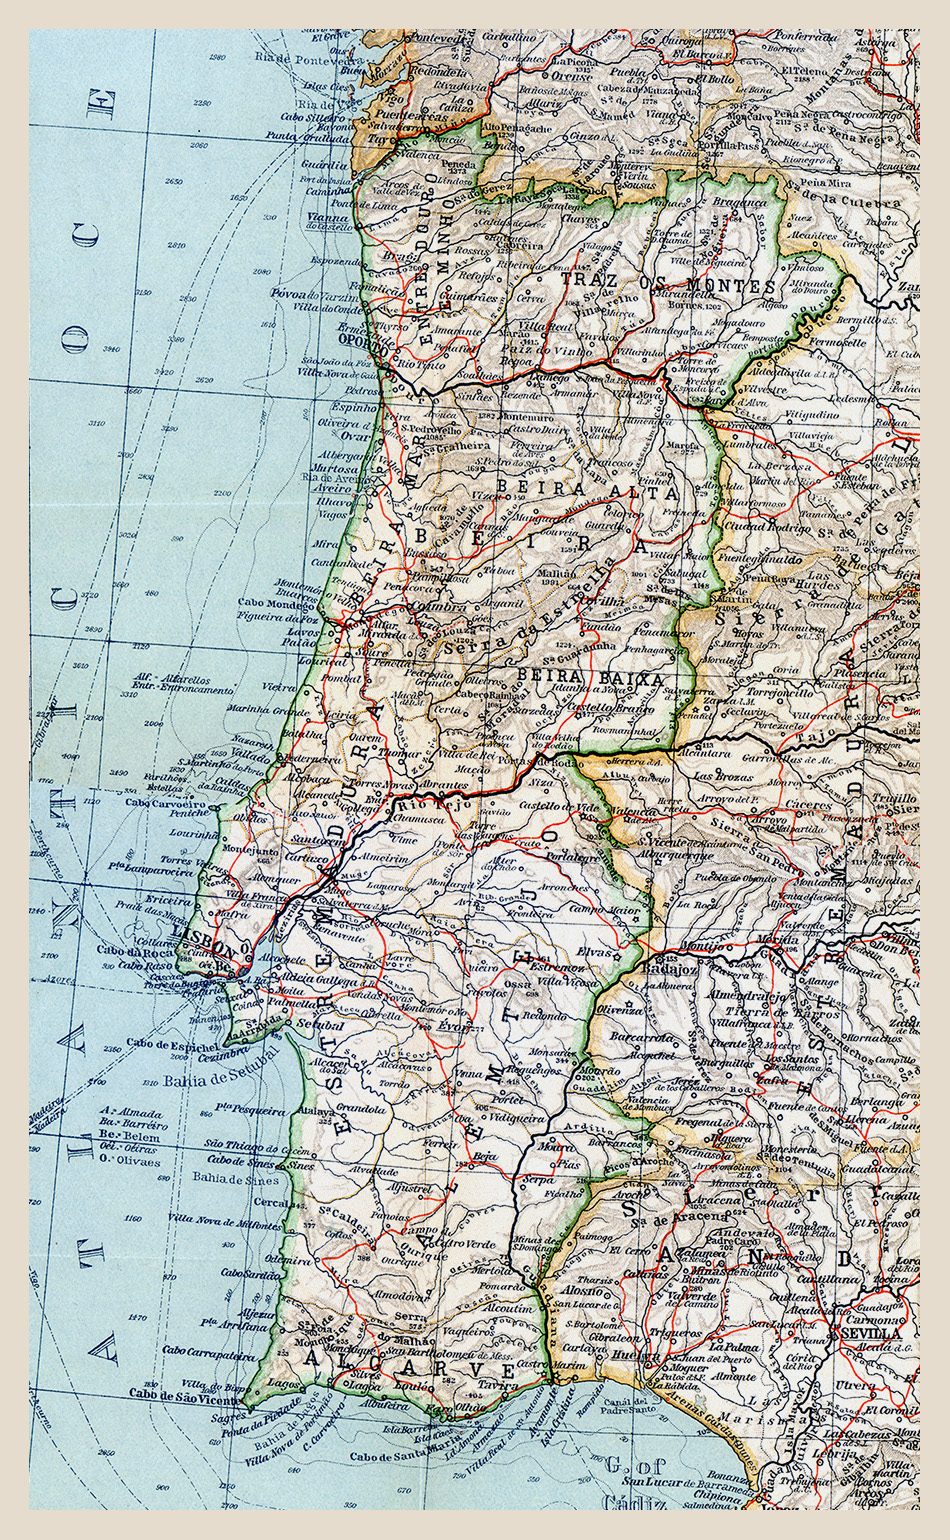 large-map-of-portugal-with-relief-portugal-large-map-with-relief